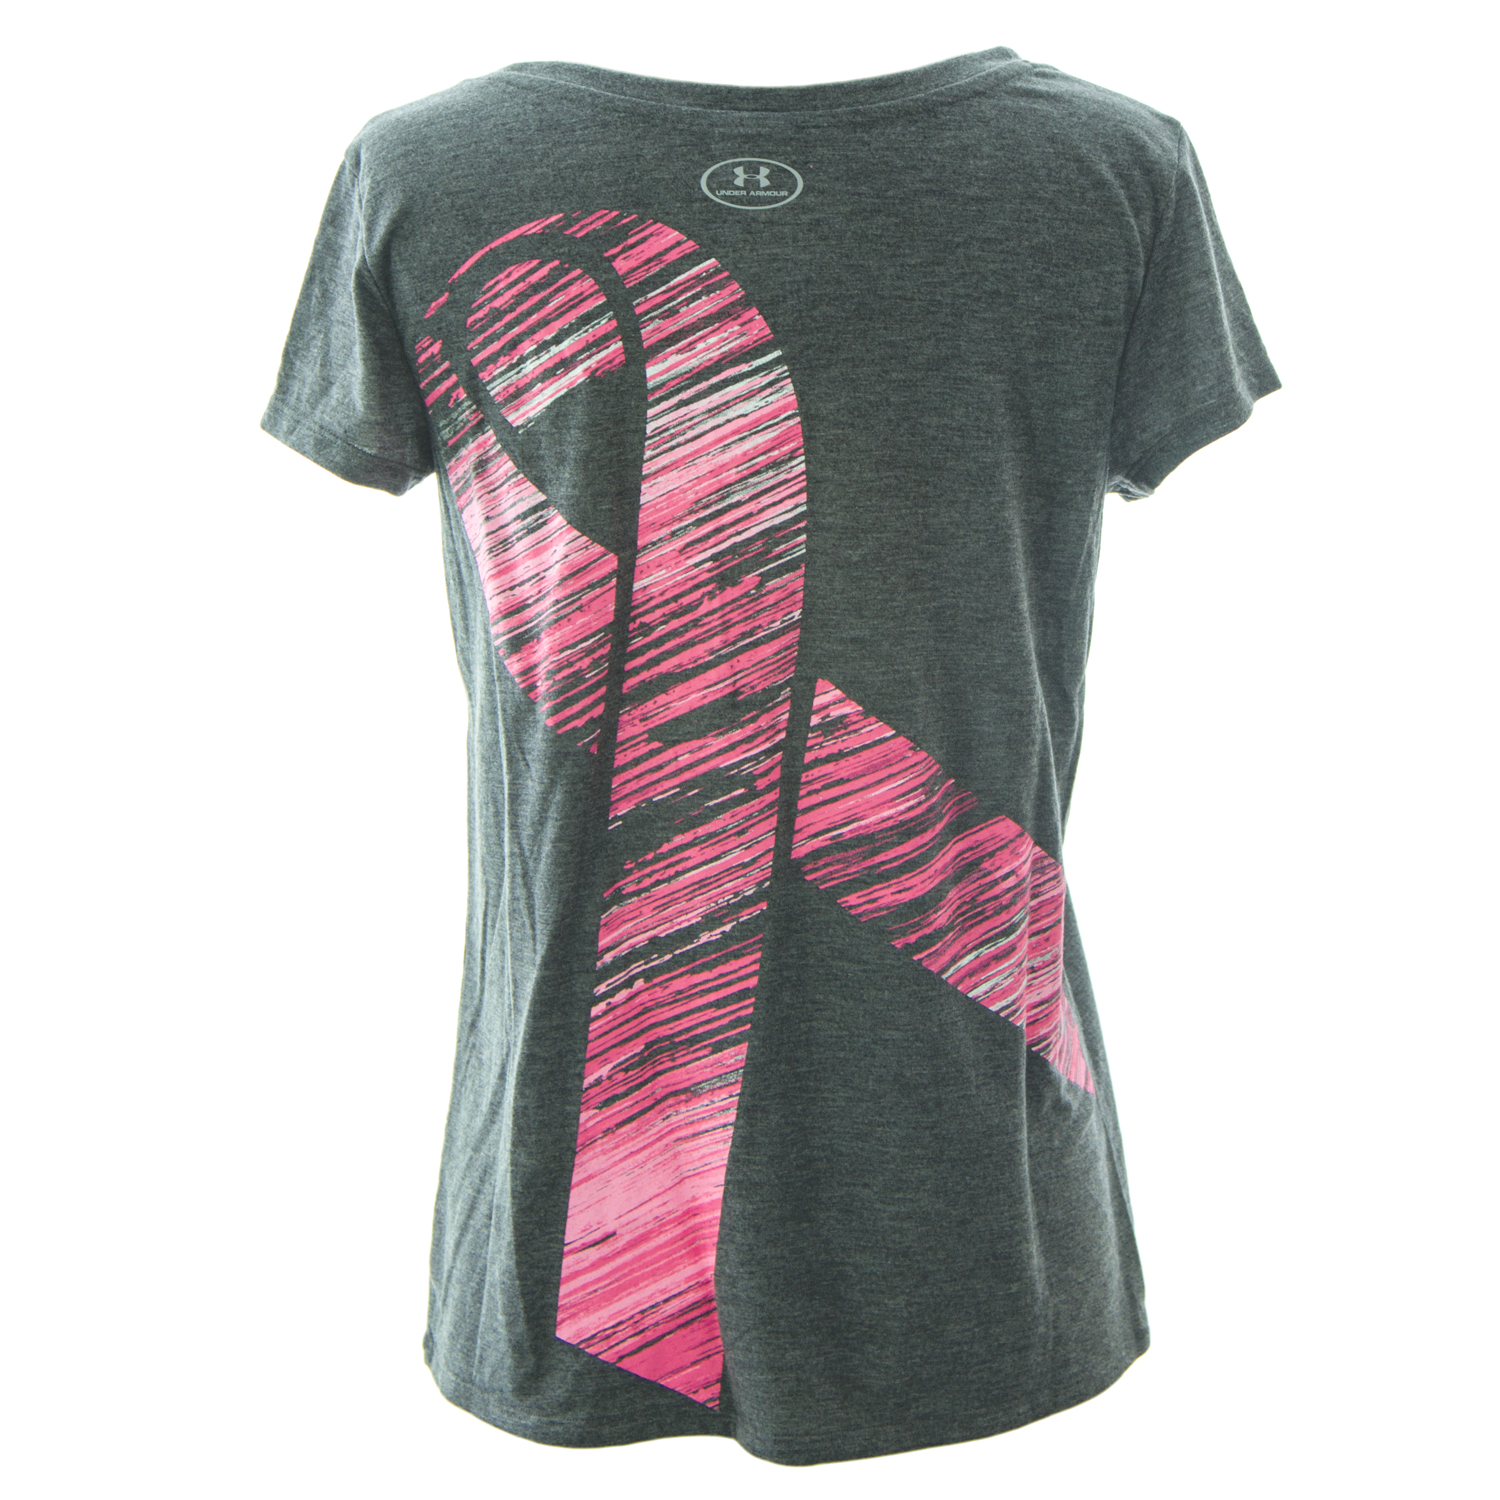 Under Armour Women's Power in Pink Go Fight Cure T-Shirt Small Charcoal - image 2 of 2